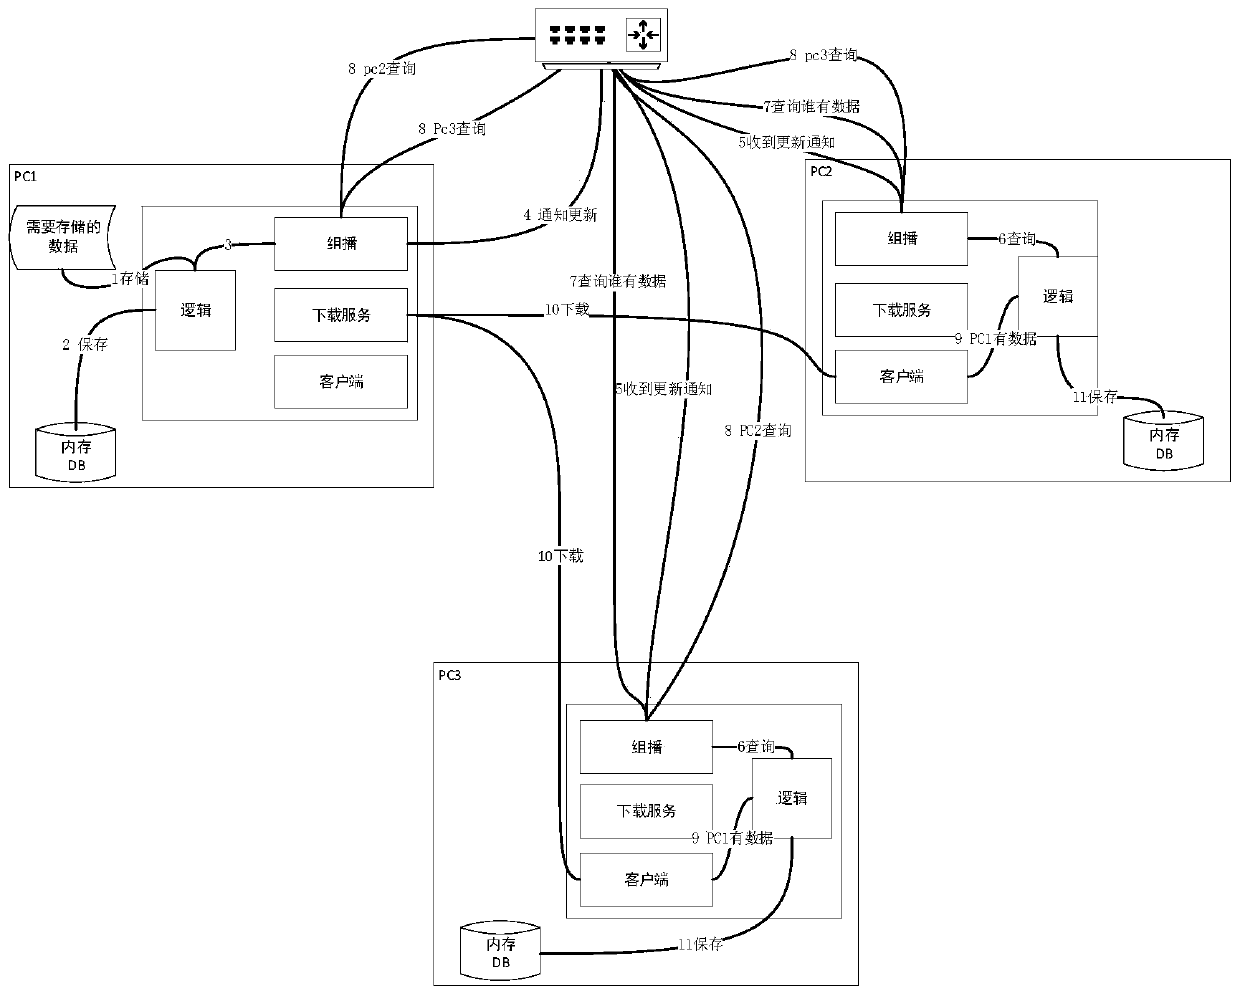 Data caching method based on local area network